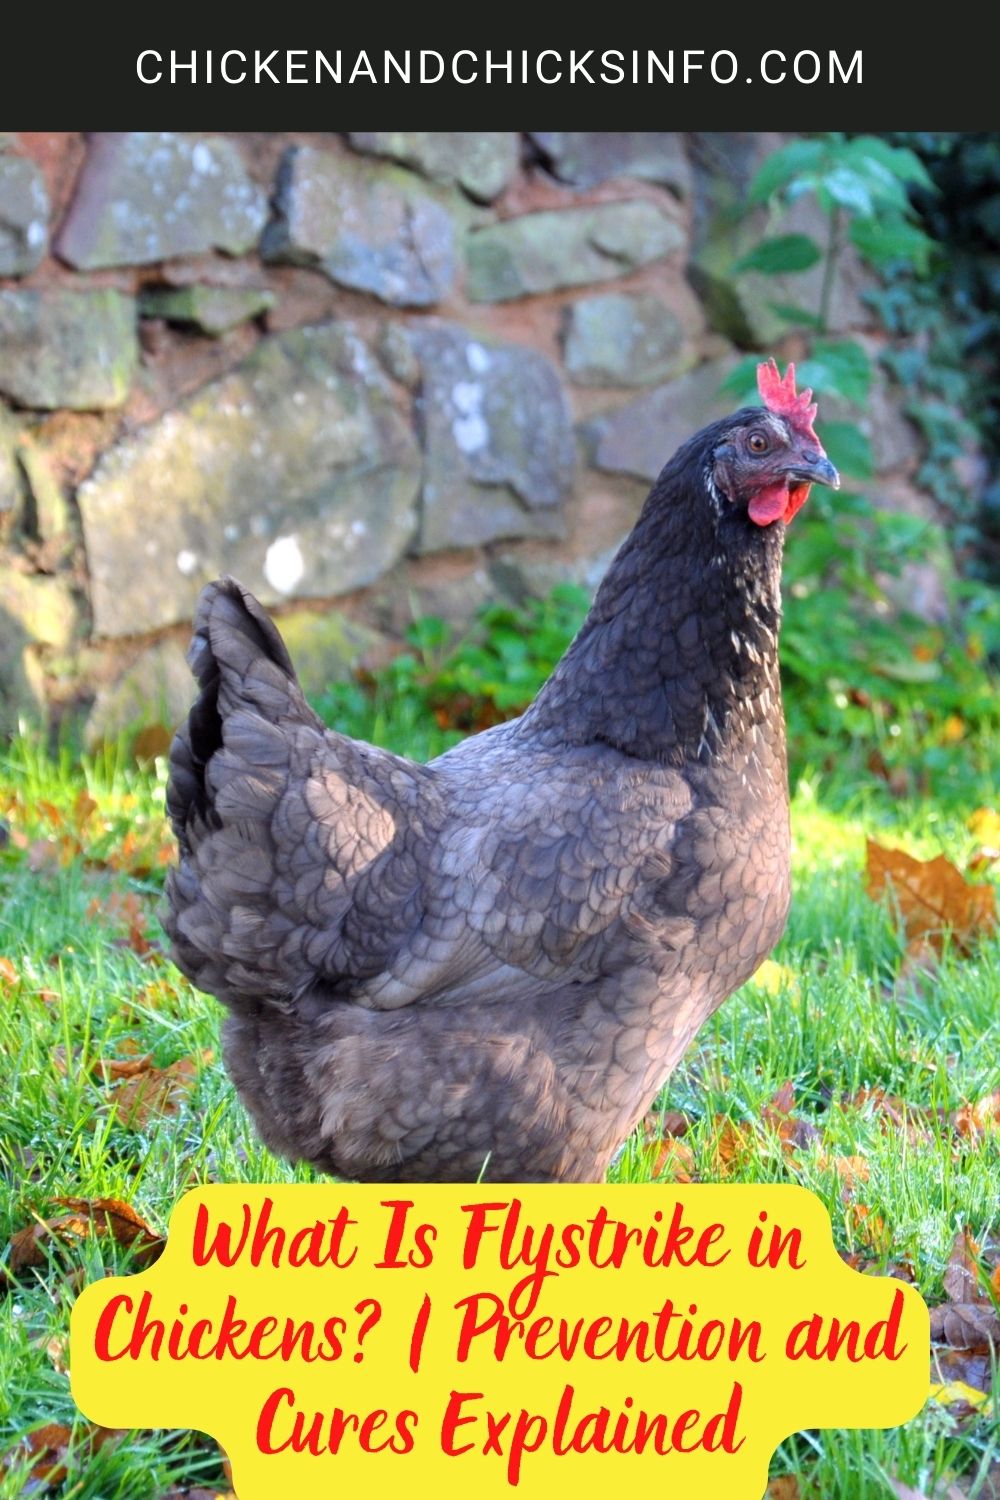 What Is Flystrike in Chickens? | Prevention and Cures Explained poster.
